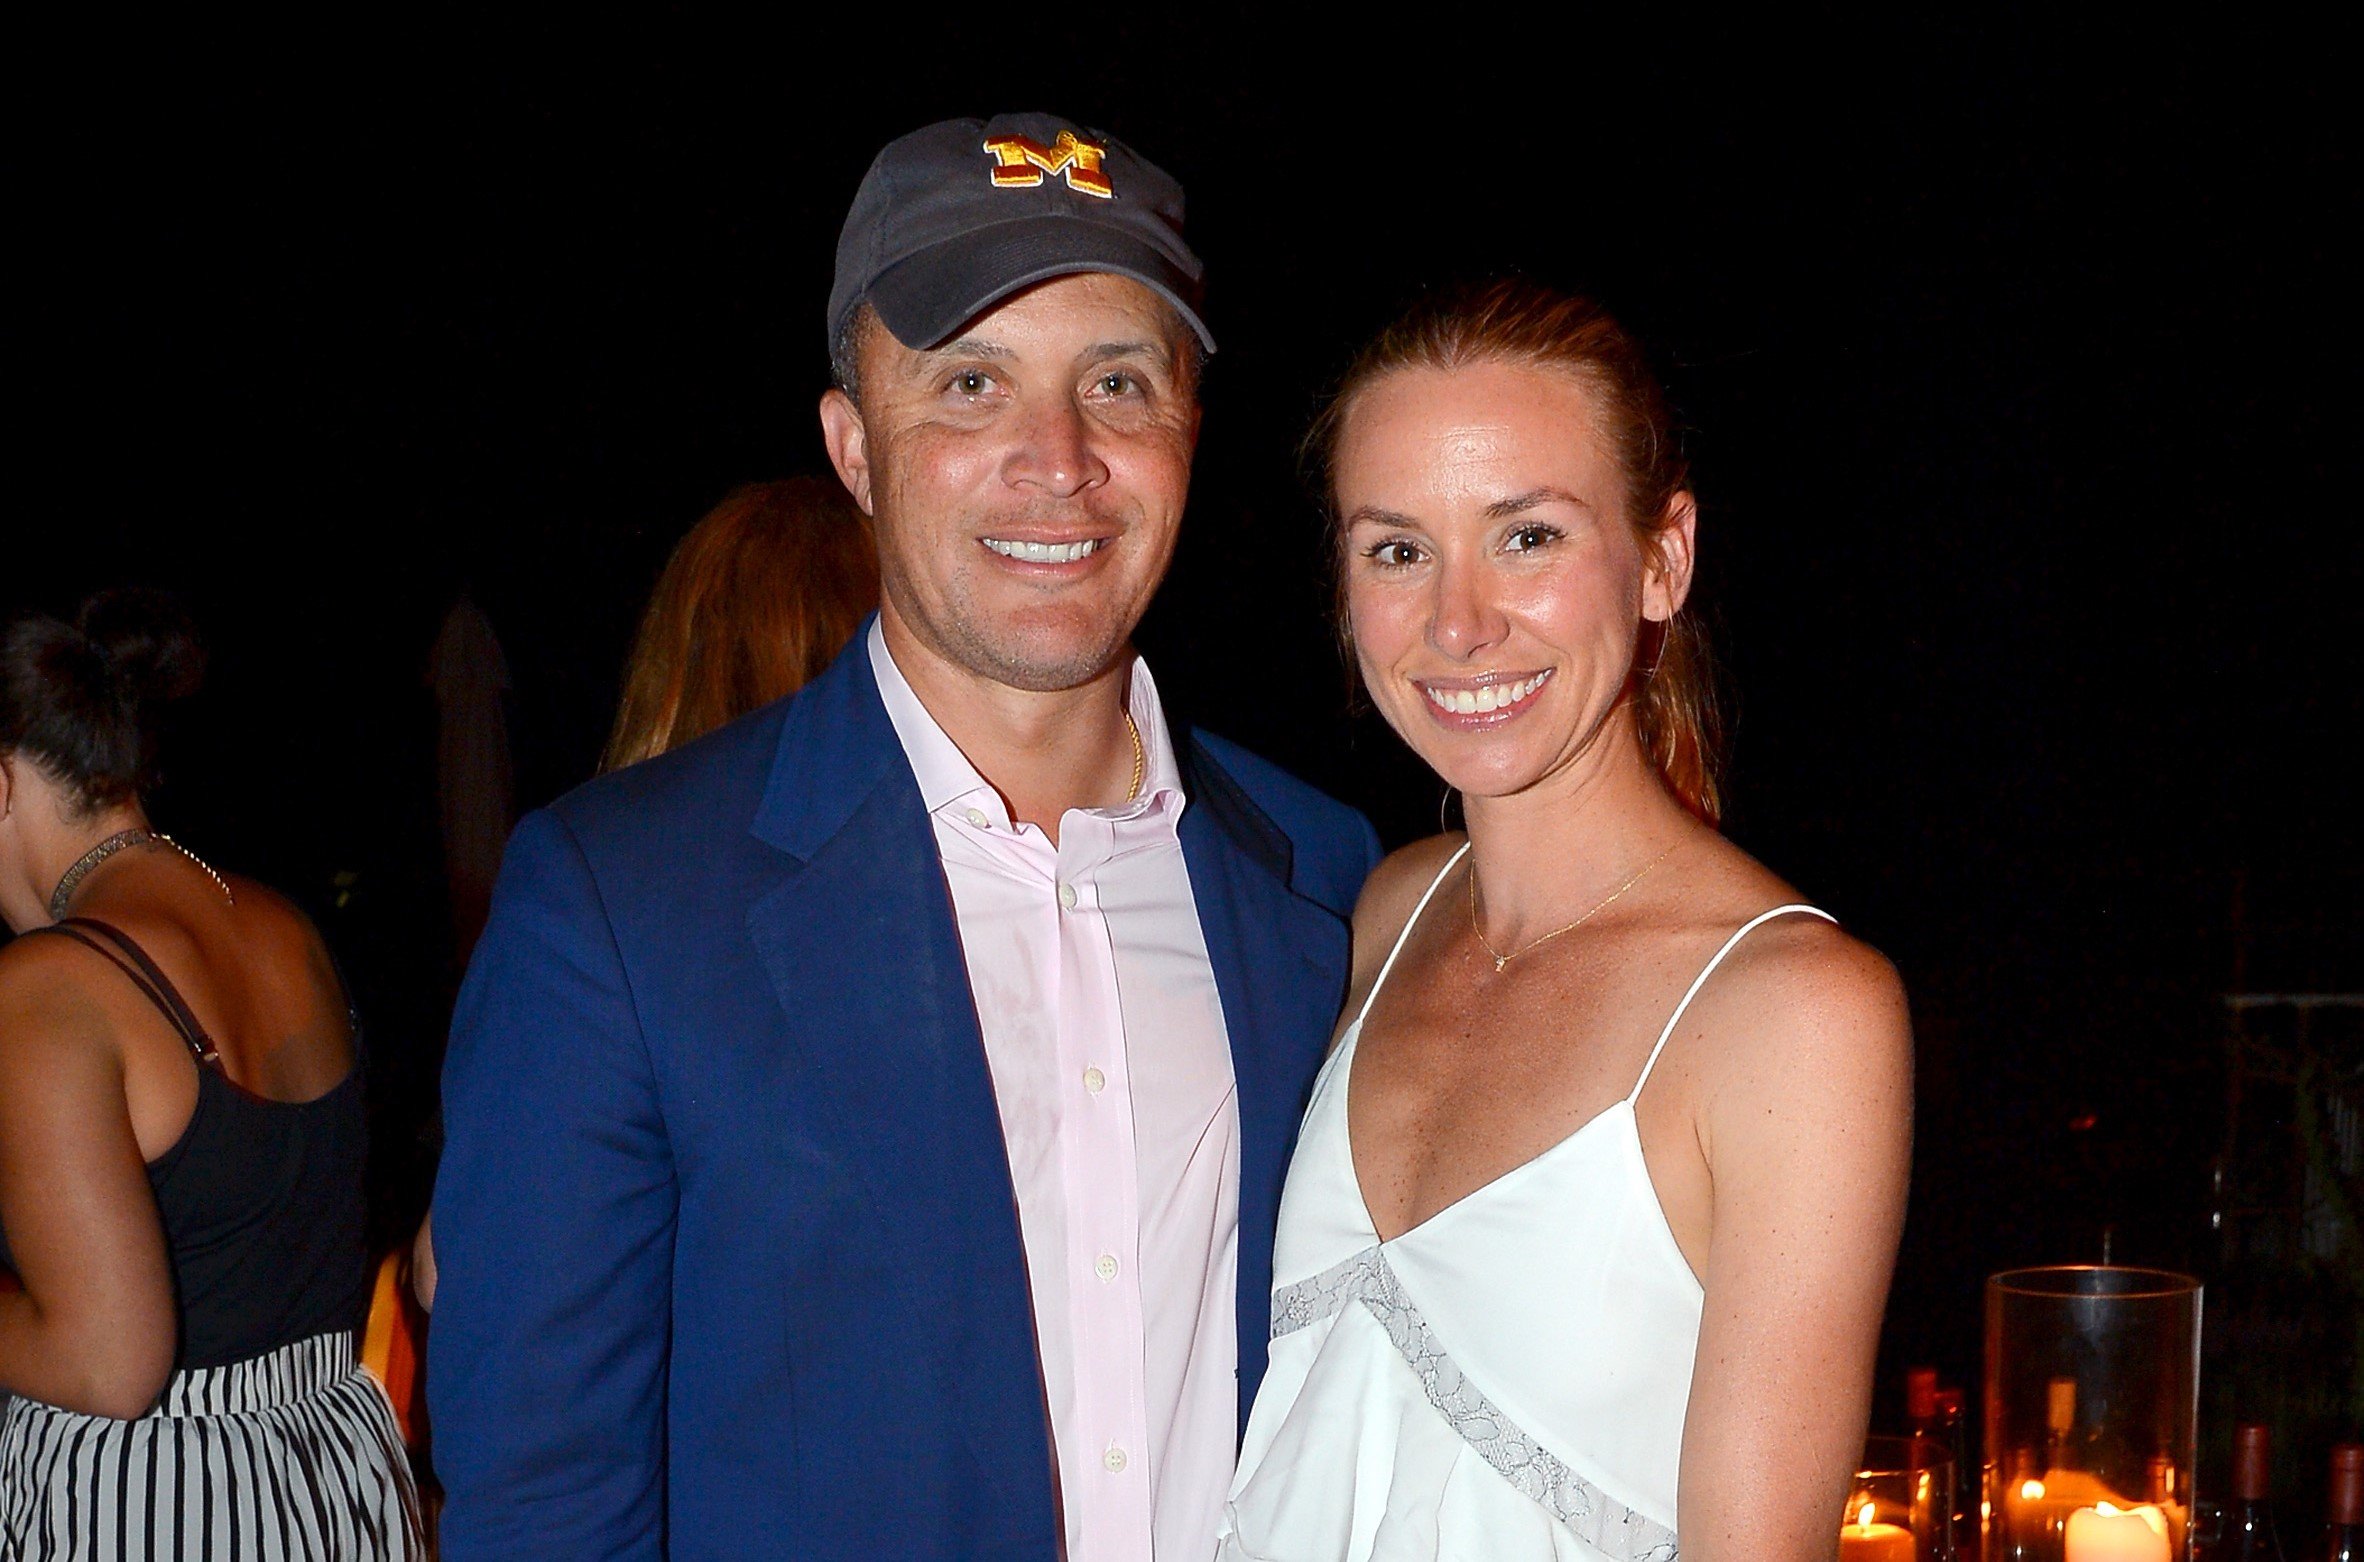 Harold Ford and Emily Ford attend the Apollo in the Hamptons 2016 party at The Creeks on August 20, 2016, in East Hampton, New York. | Source: Getty Images